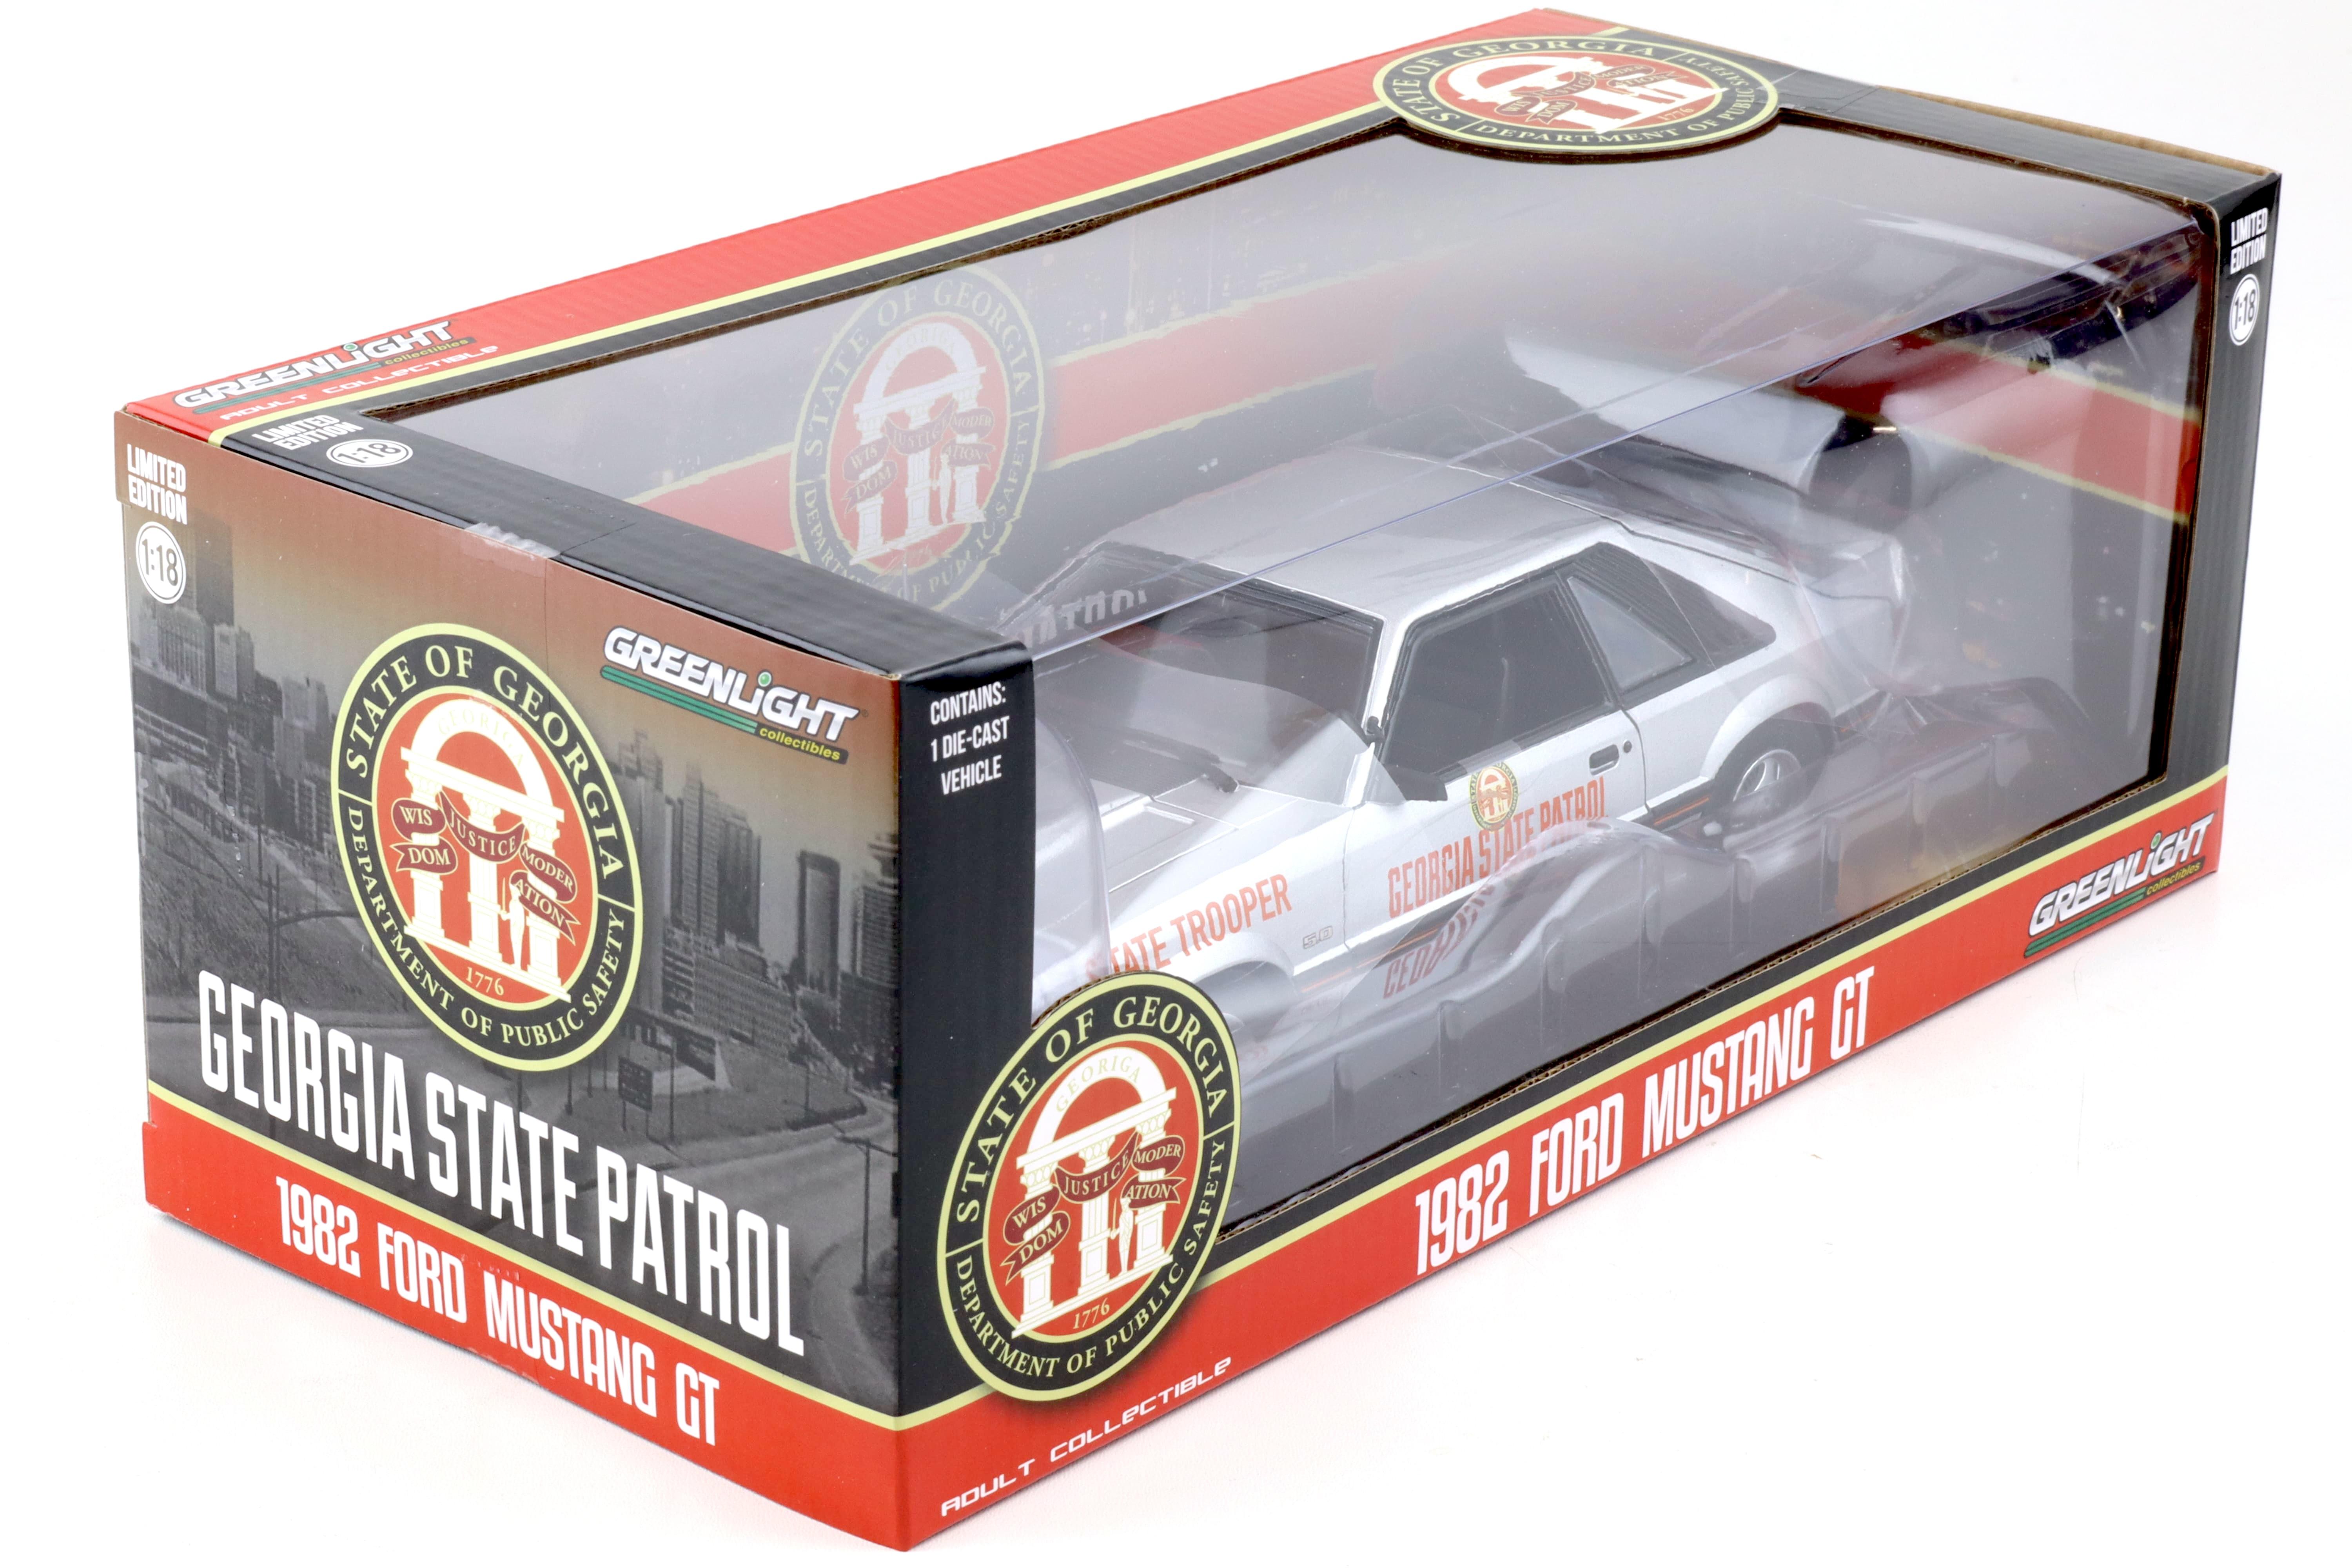 1:18 Greenlight 1982 Ford Mustang GT 5.0 Coupe SSP Georgia State Patrol State Trooper